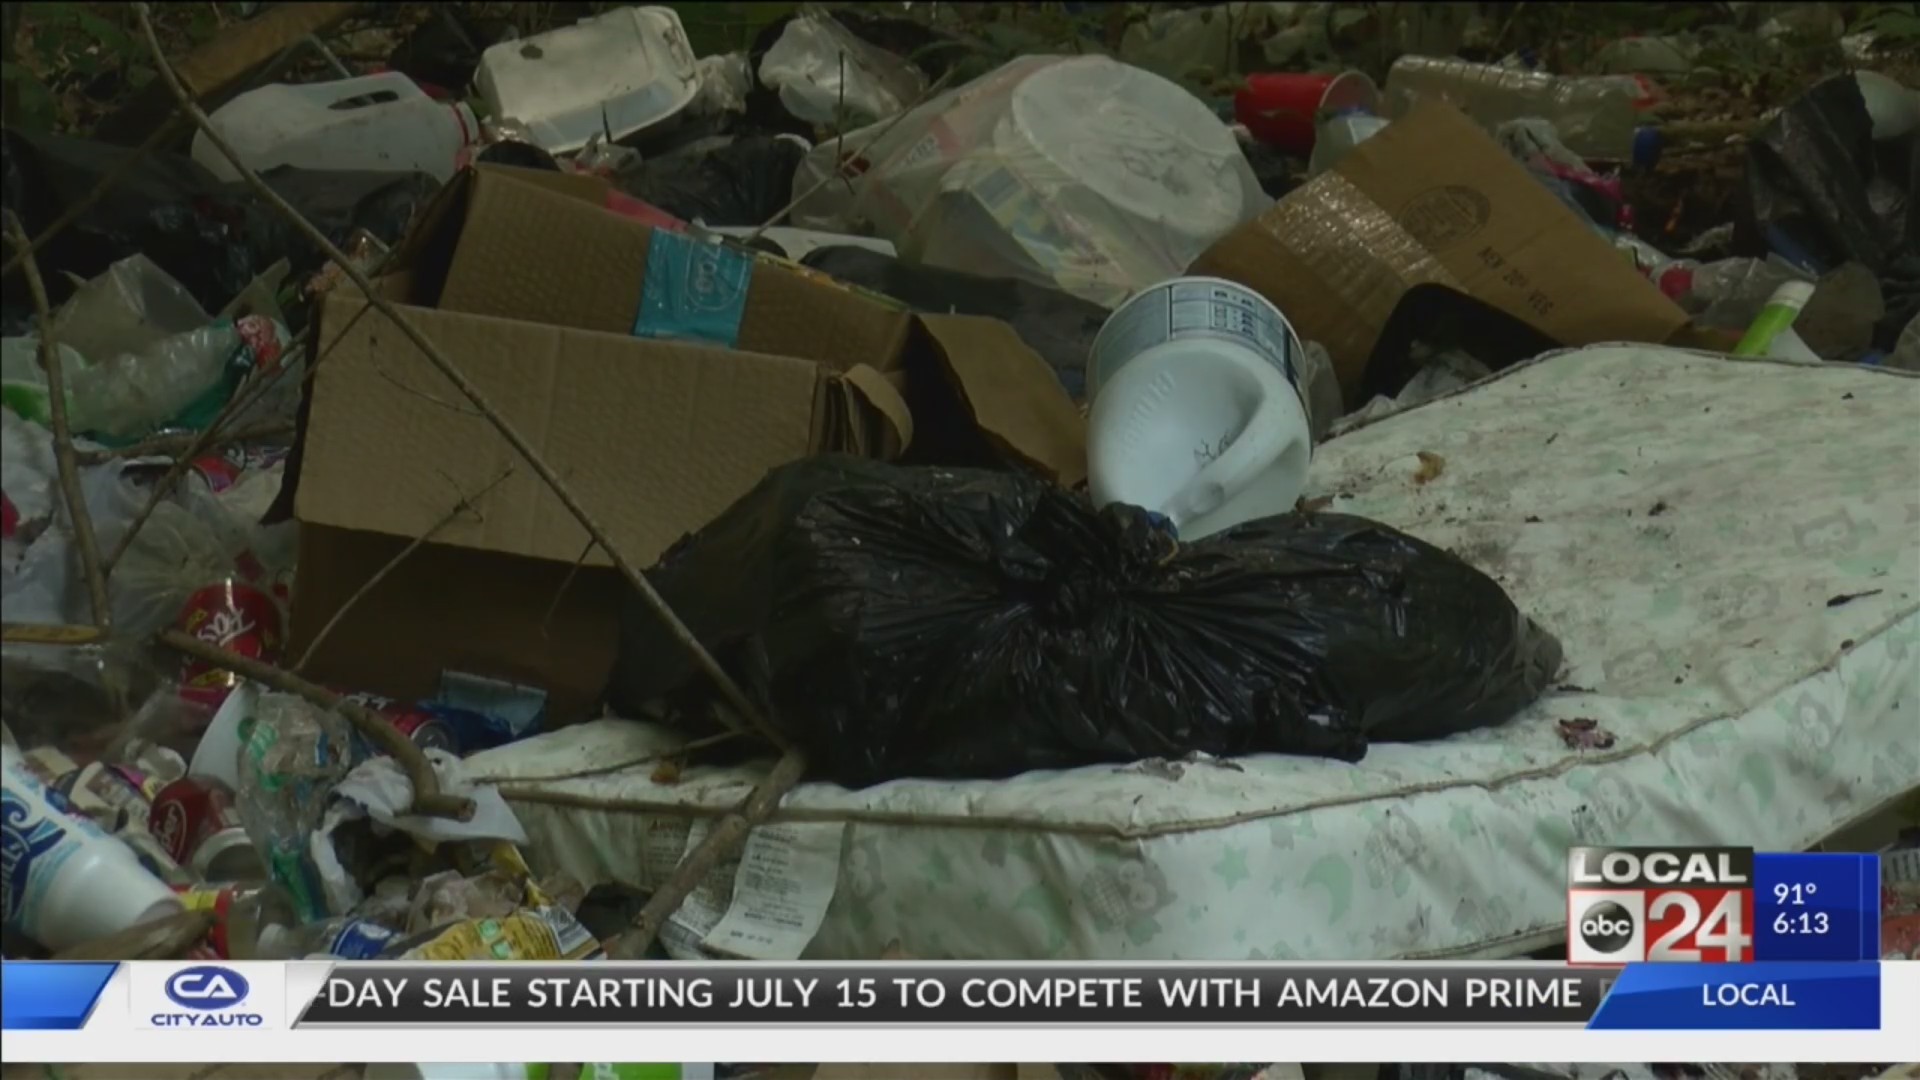 Illegal trash dump site cleaned up after Local 24 News exclusive story aired